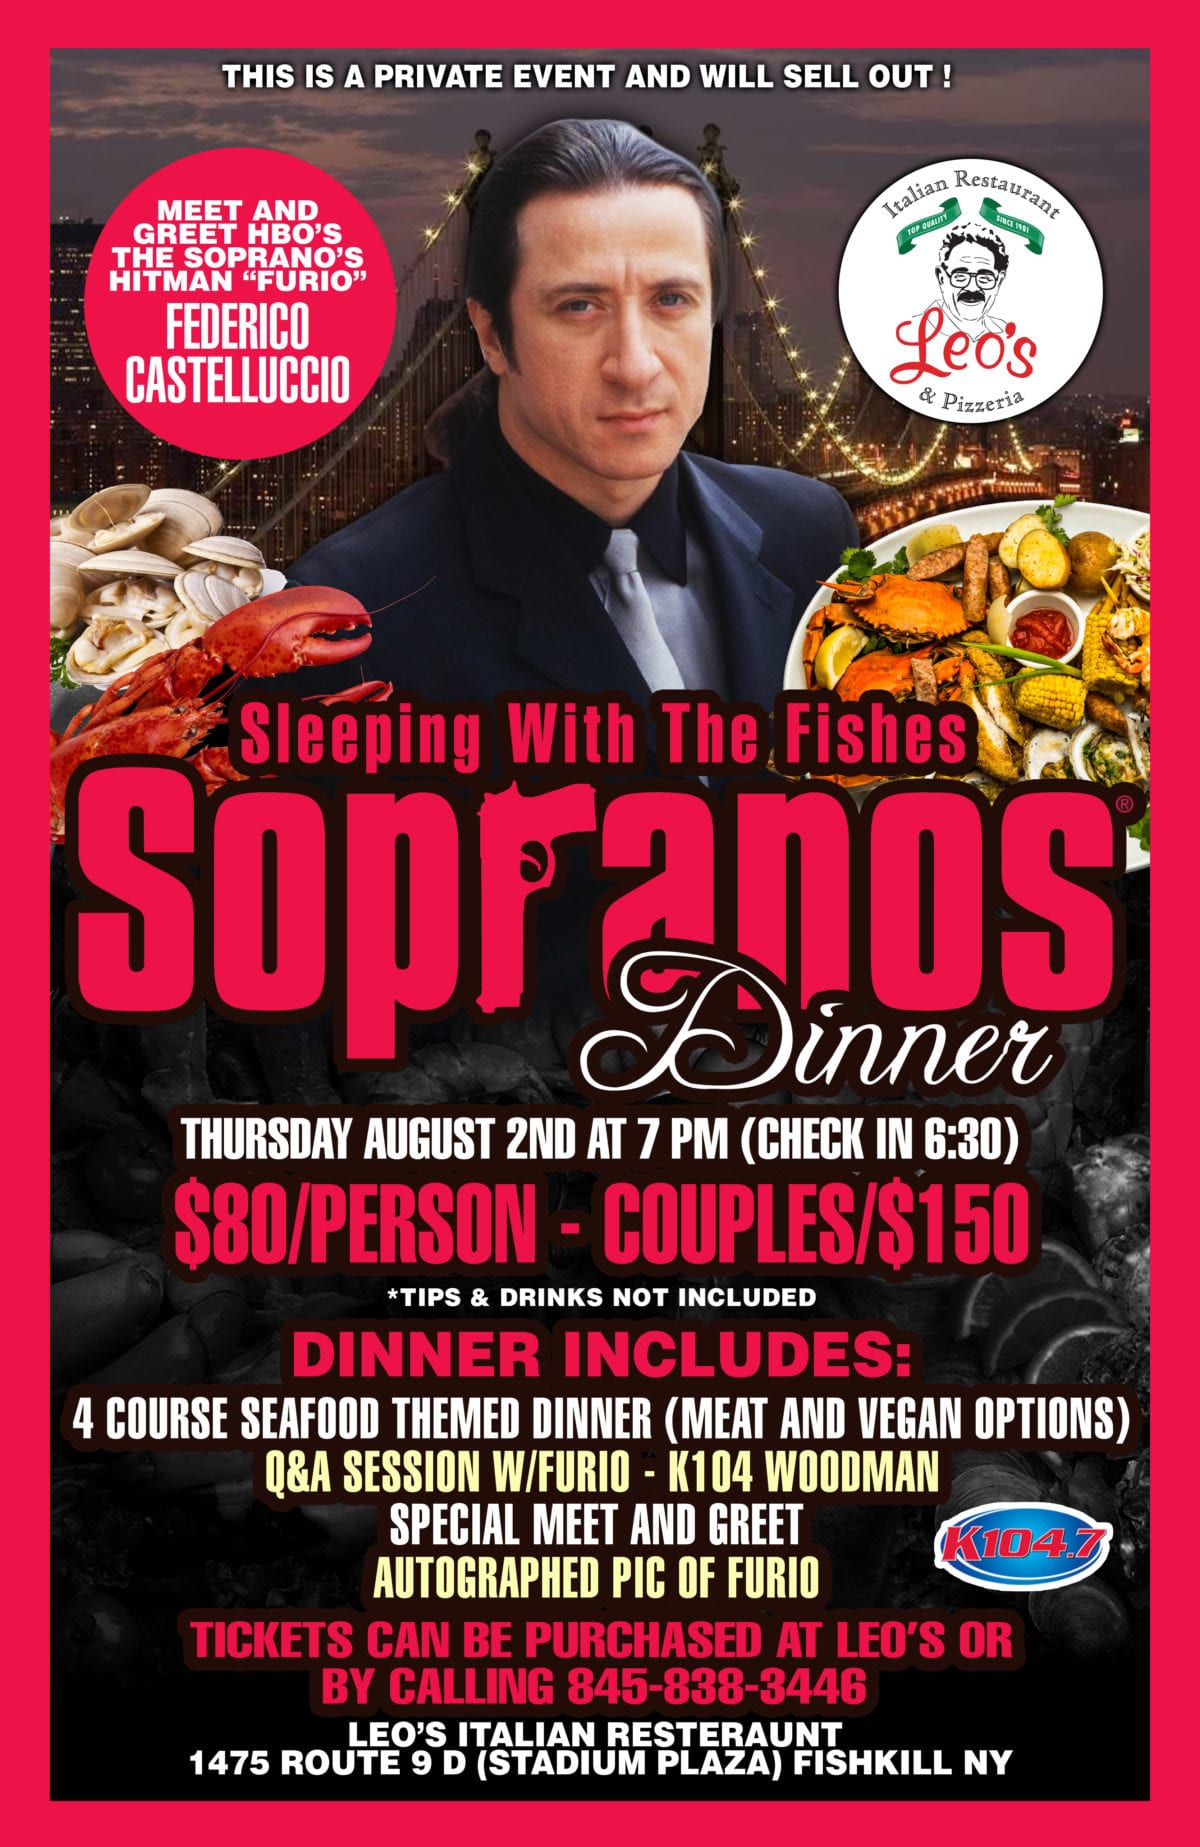 Sleeping With The Fishes Sopranos Dinner With Special Guest Star